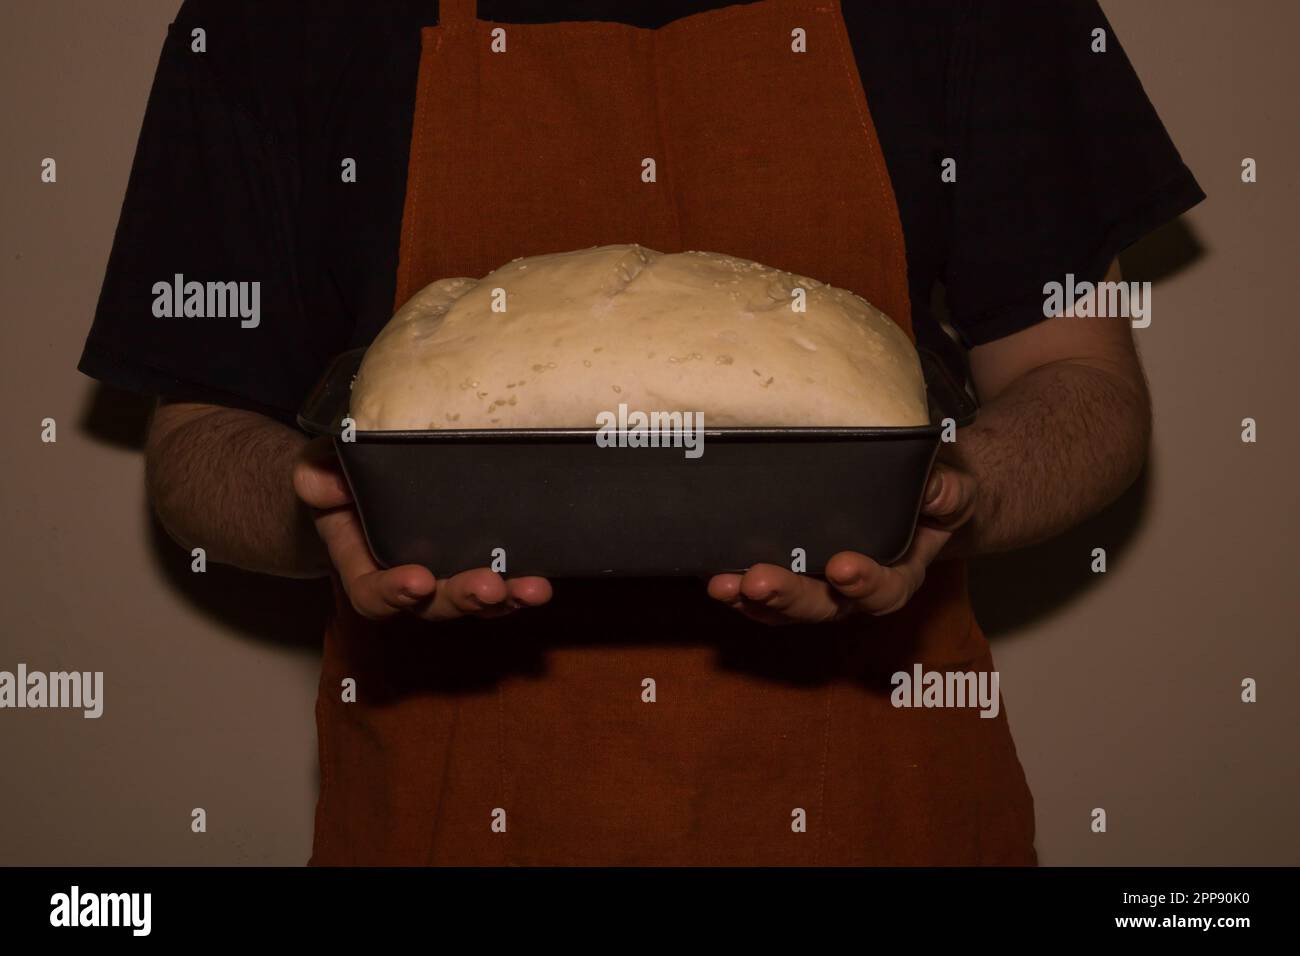 Baker in apron holding a homemade rised bread dough. An old-style home bakery. World cuisine - bread and bakery products Stock Photo